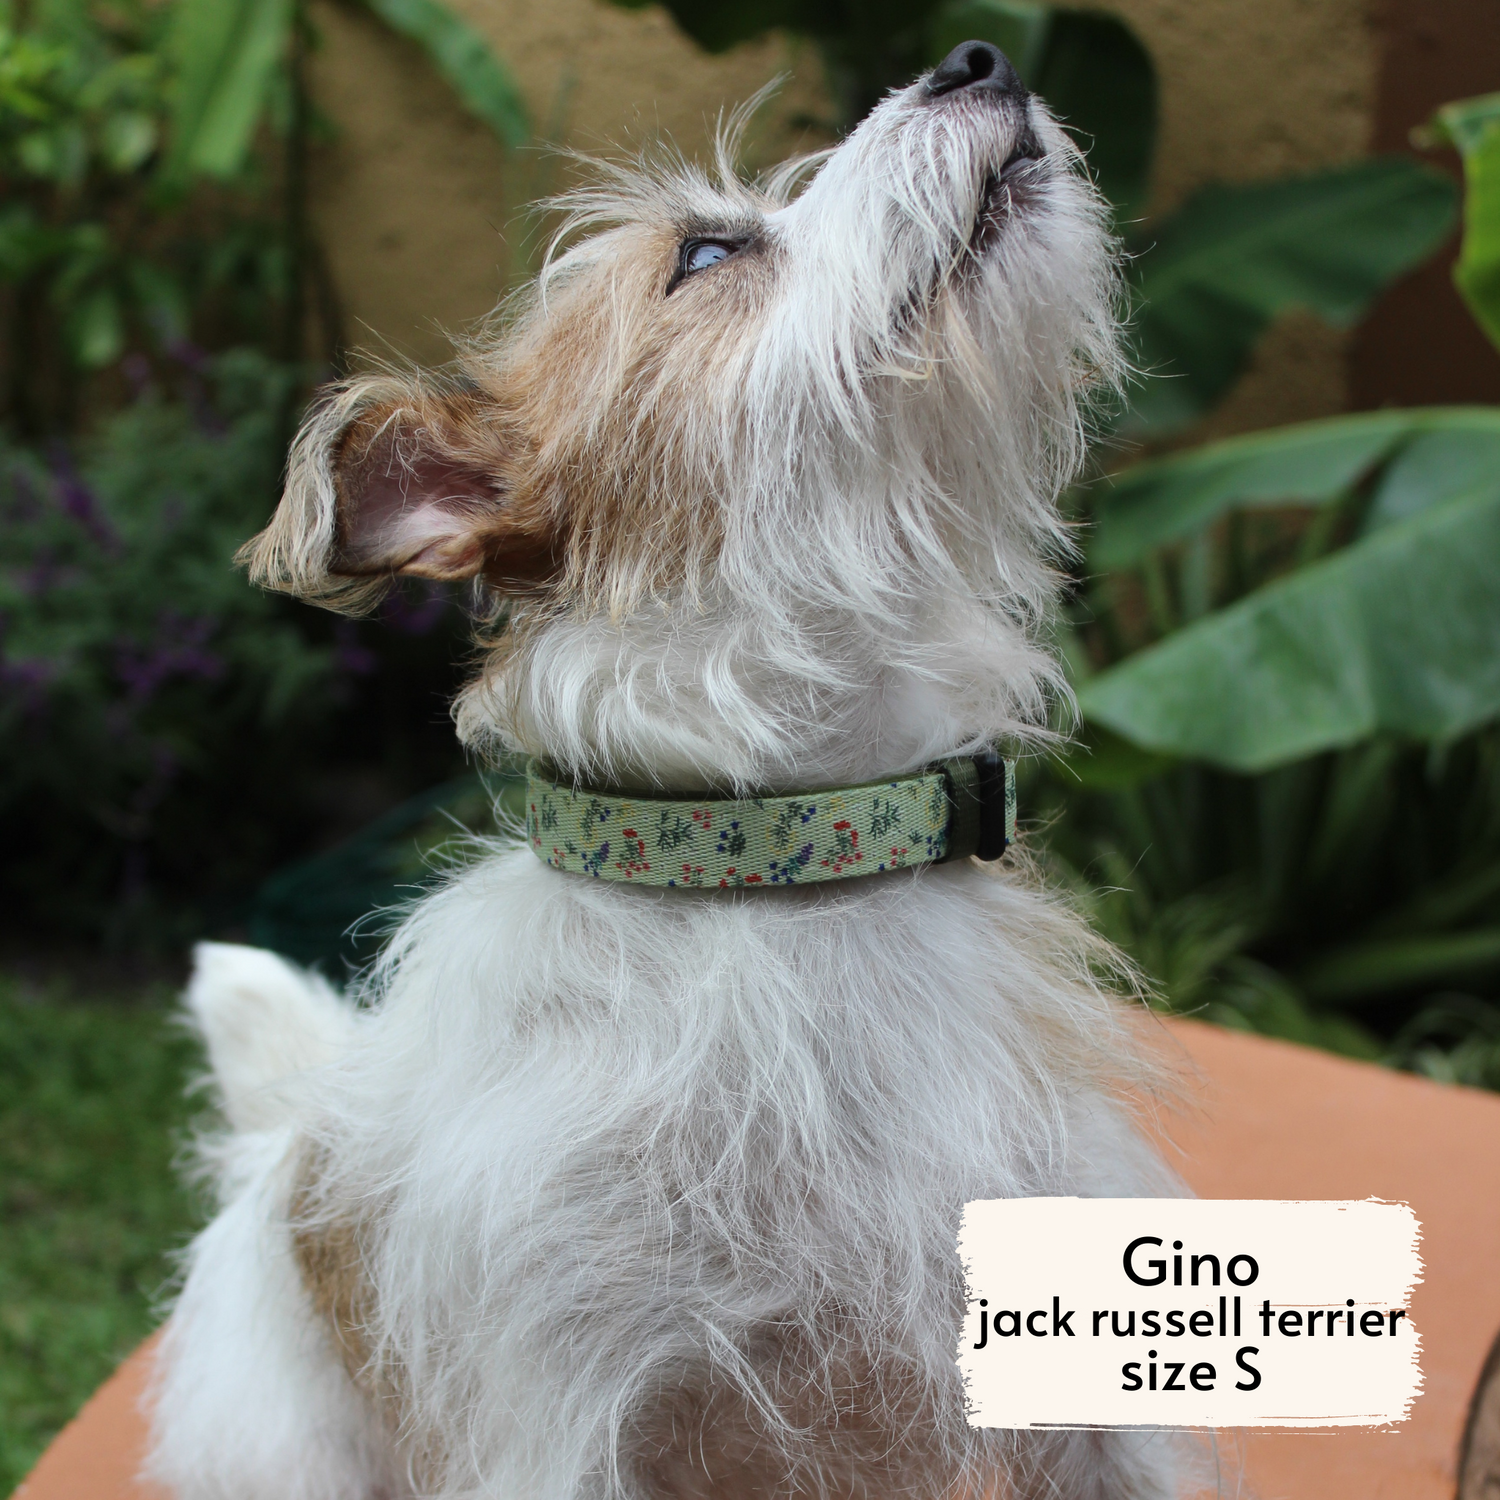 Pata Paw alpine wildflowers collar as seen on a small-sized dog, Gino, a Jack Russell Terrier